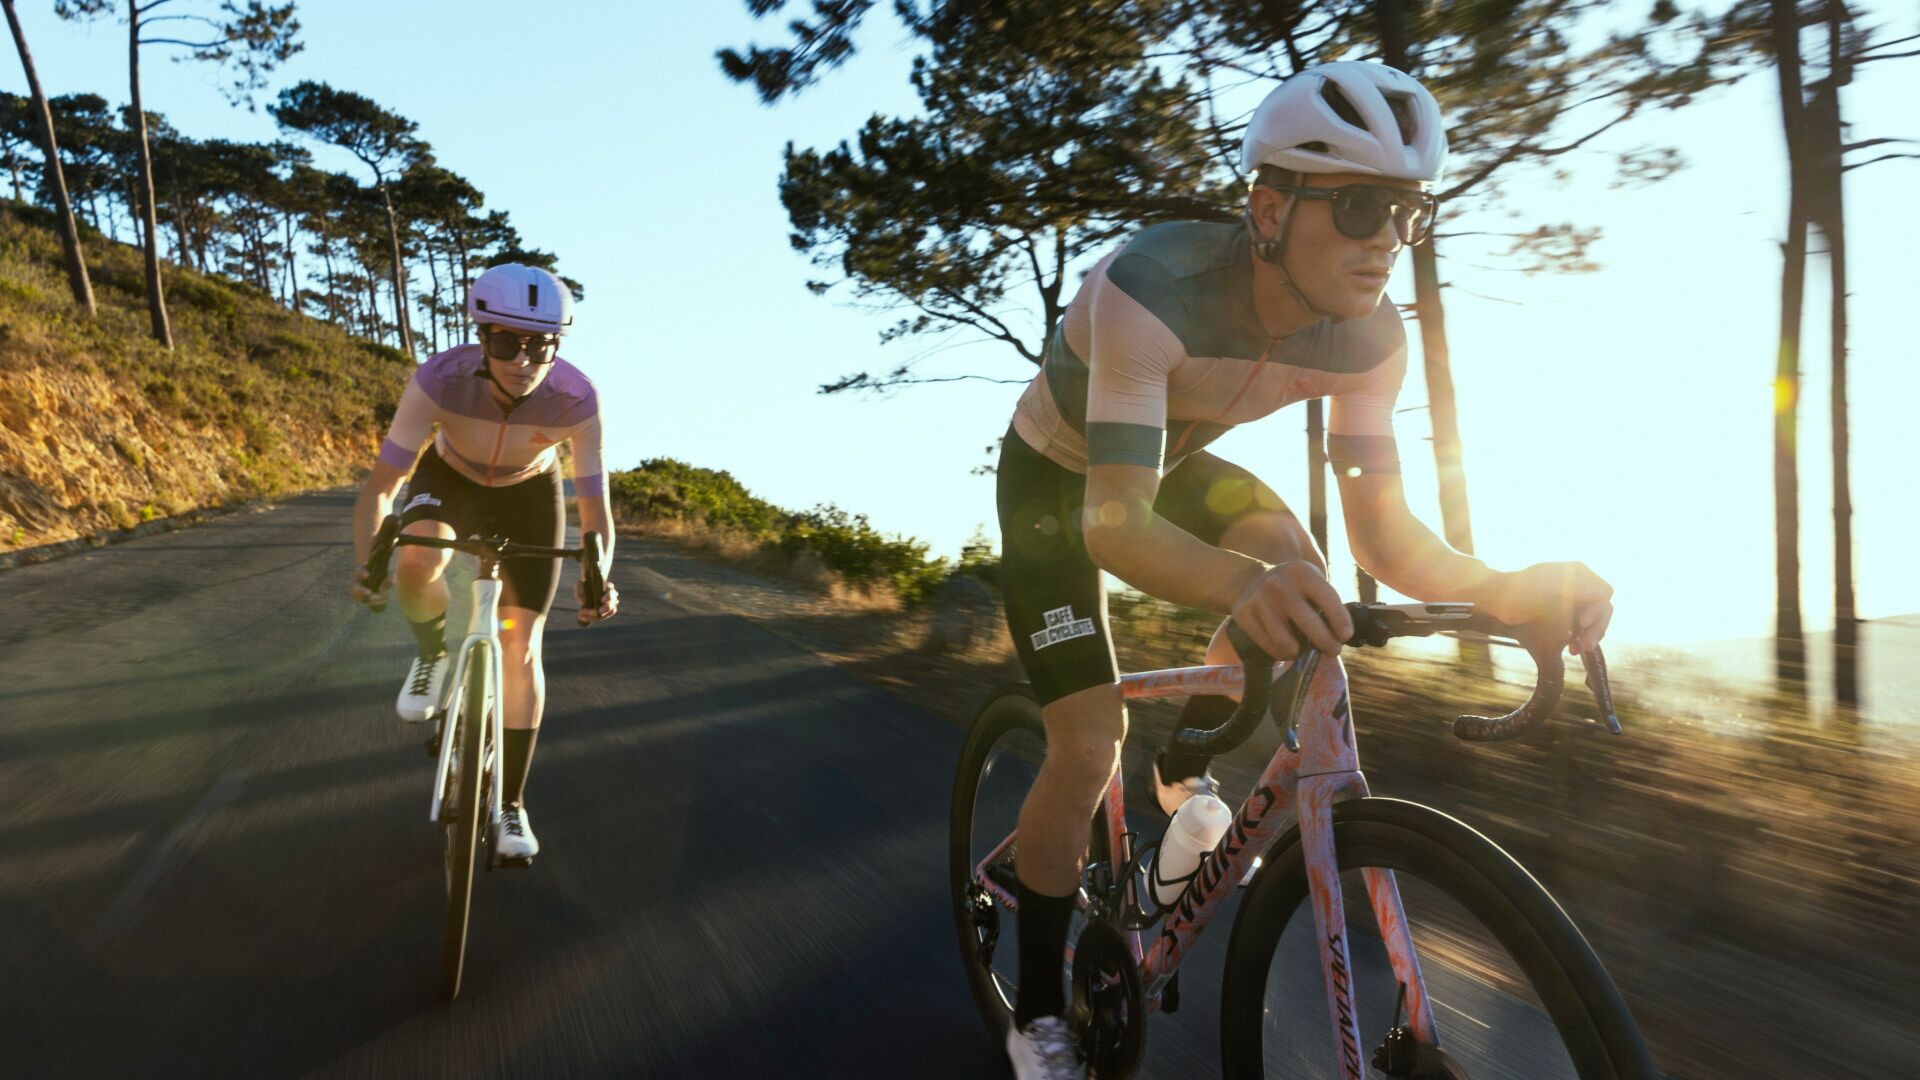 Two cyclists in sync, leading the way on a sunlit road ride, with the focus on the lead rider's determination @ Bici.